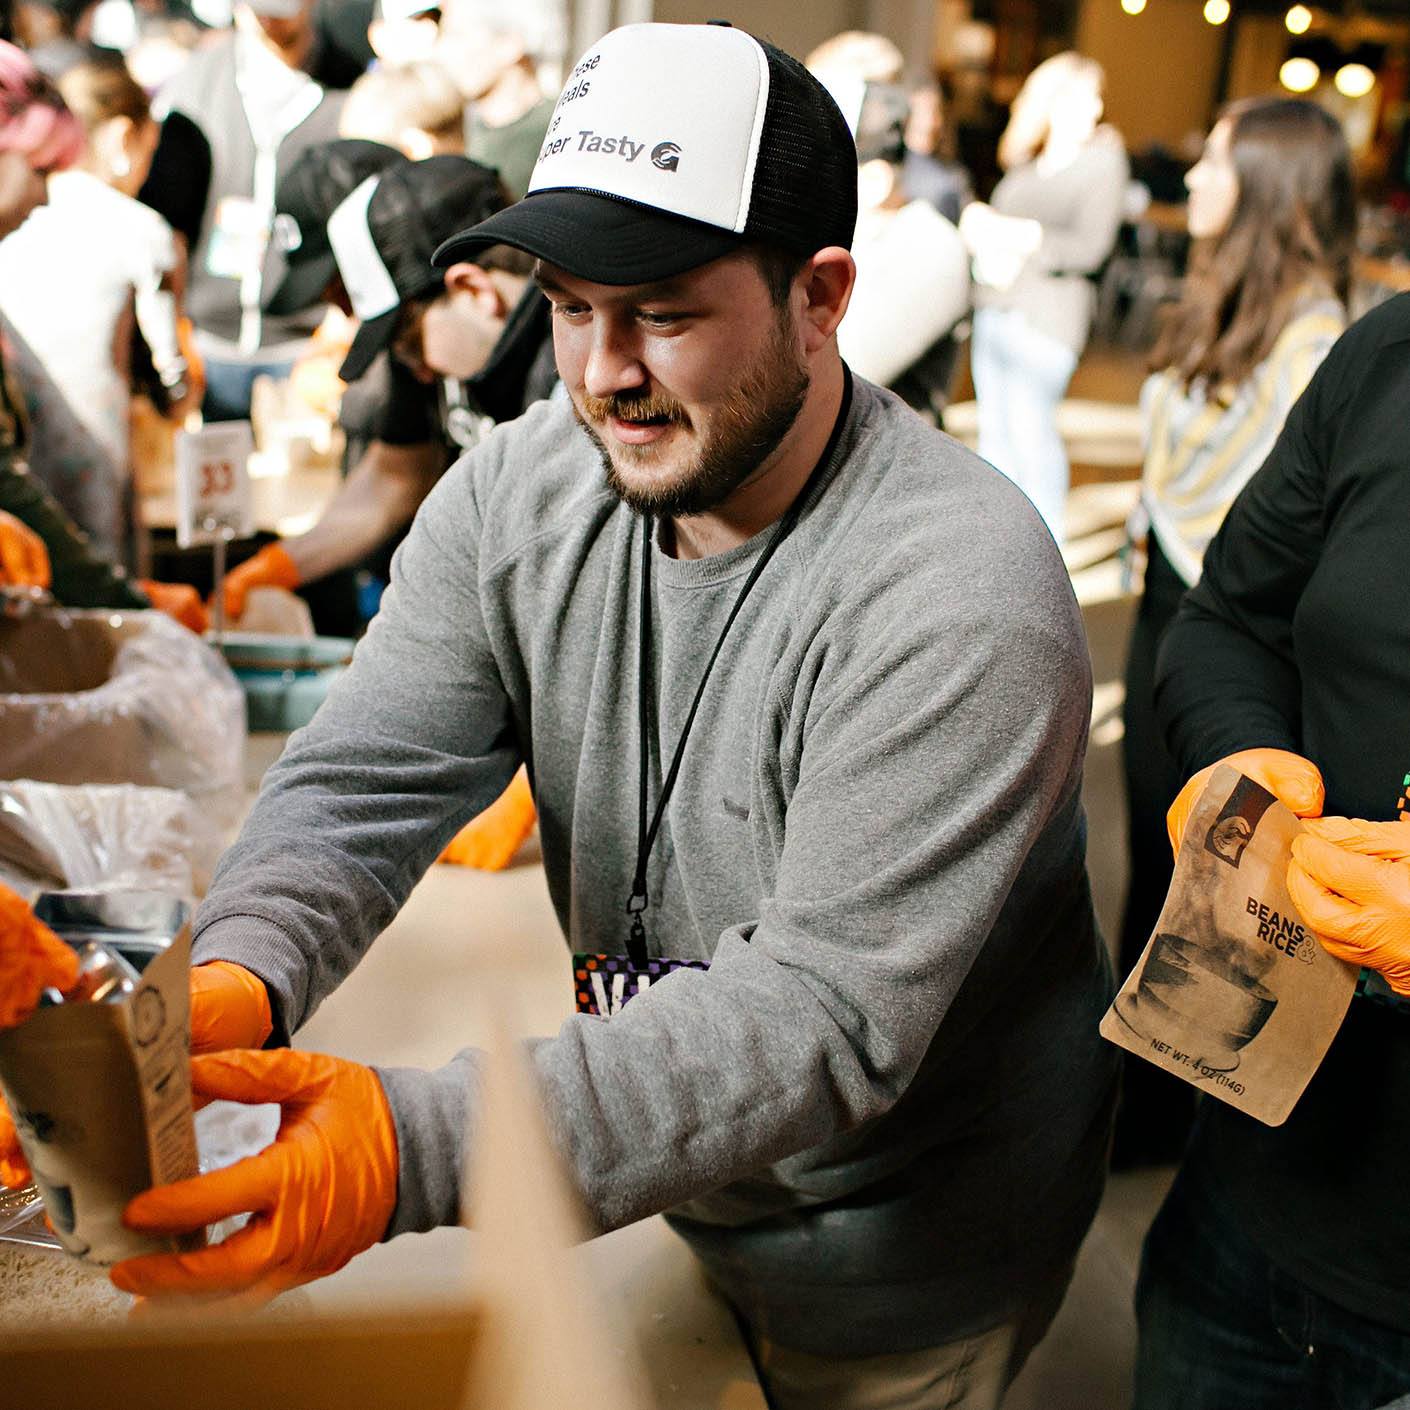 A man at a meal packing event hold a bag wearing gloves.